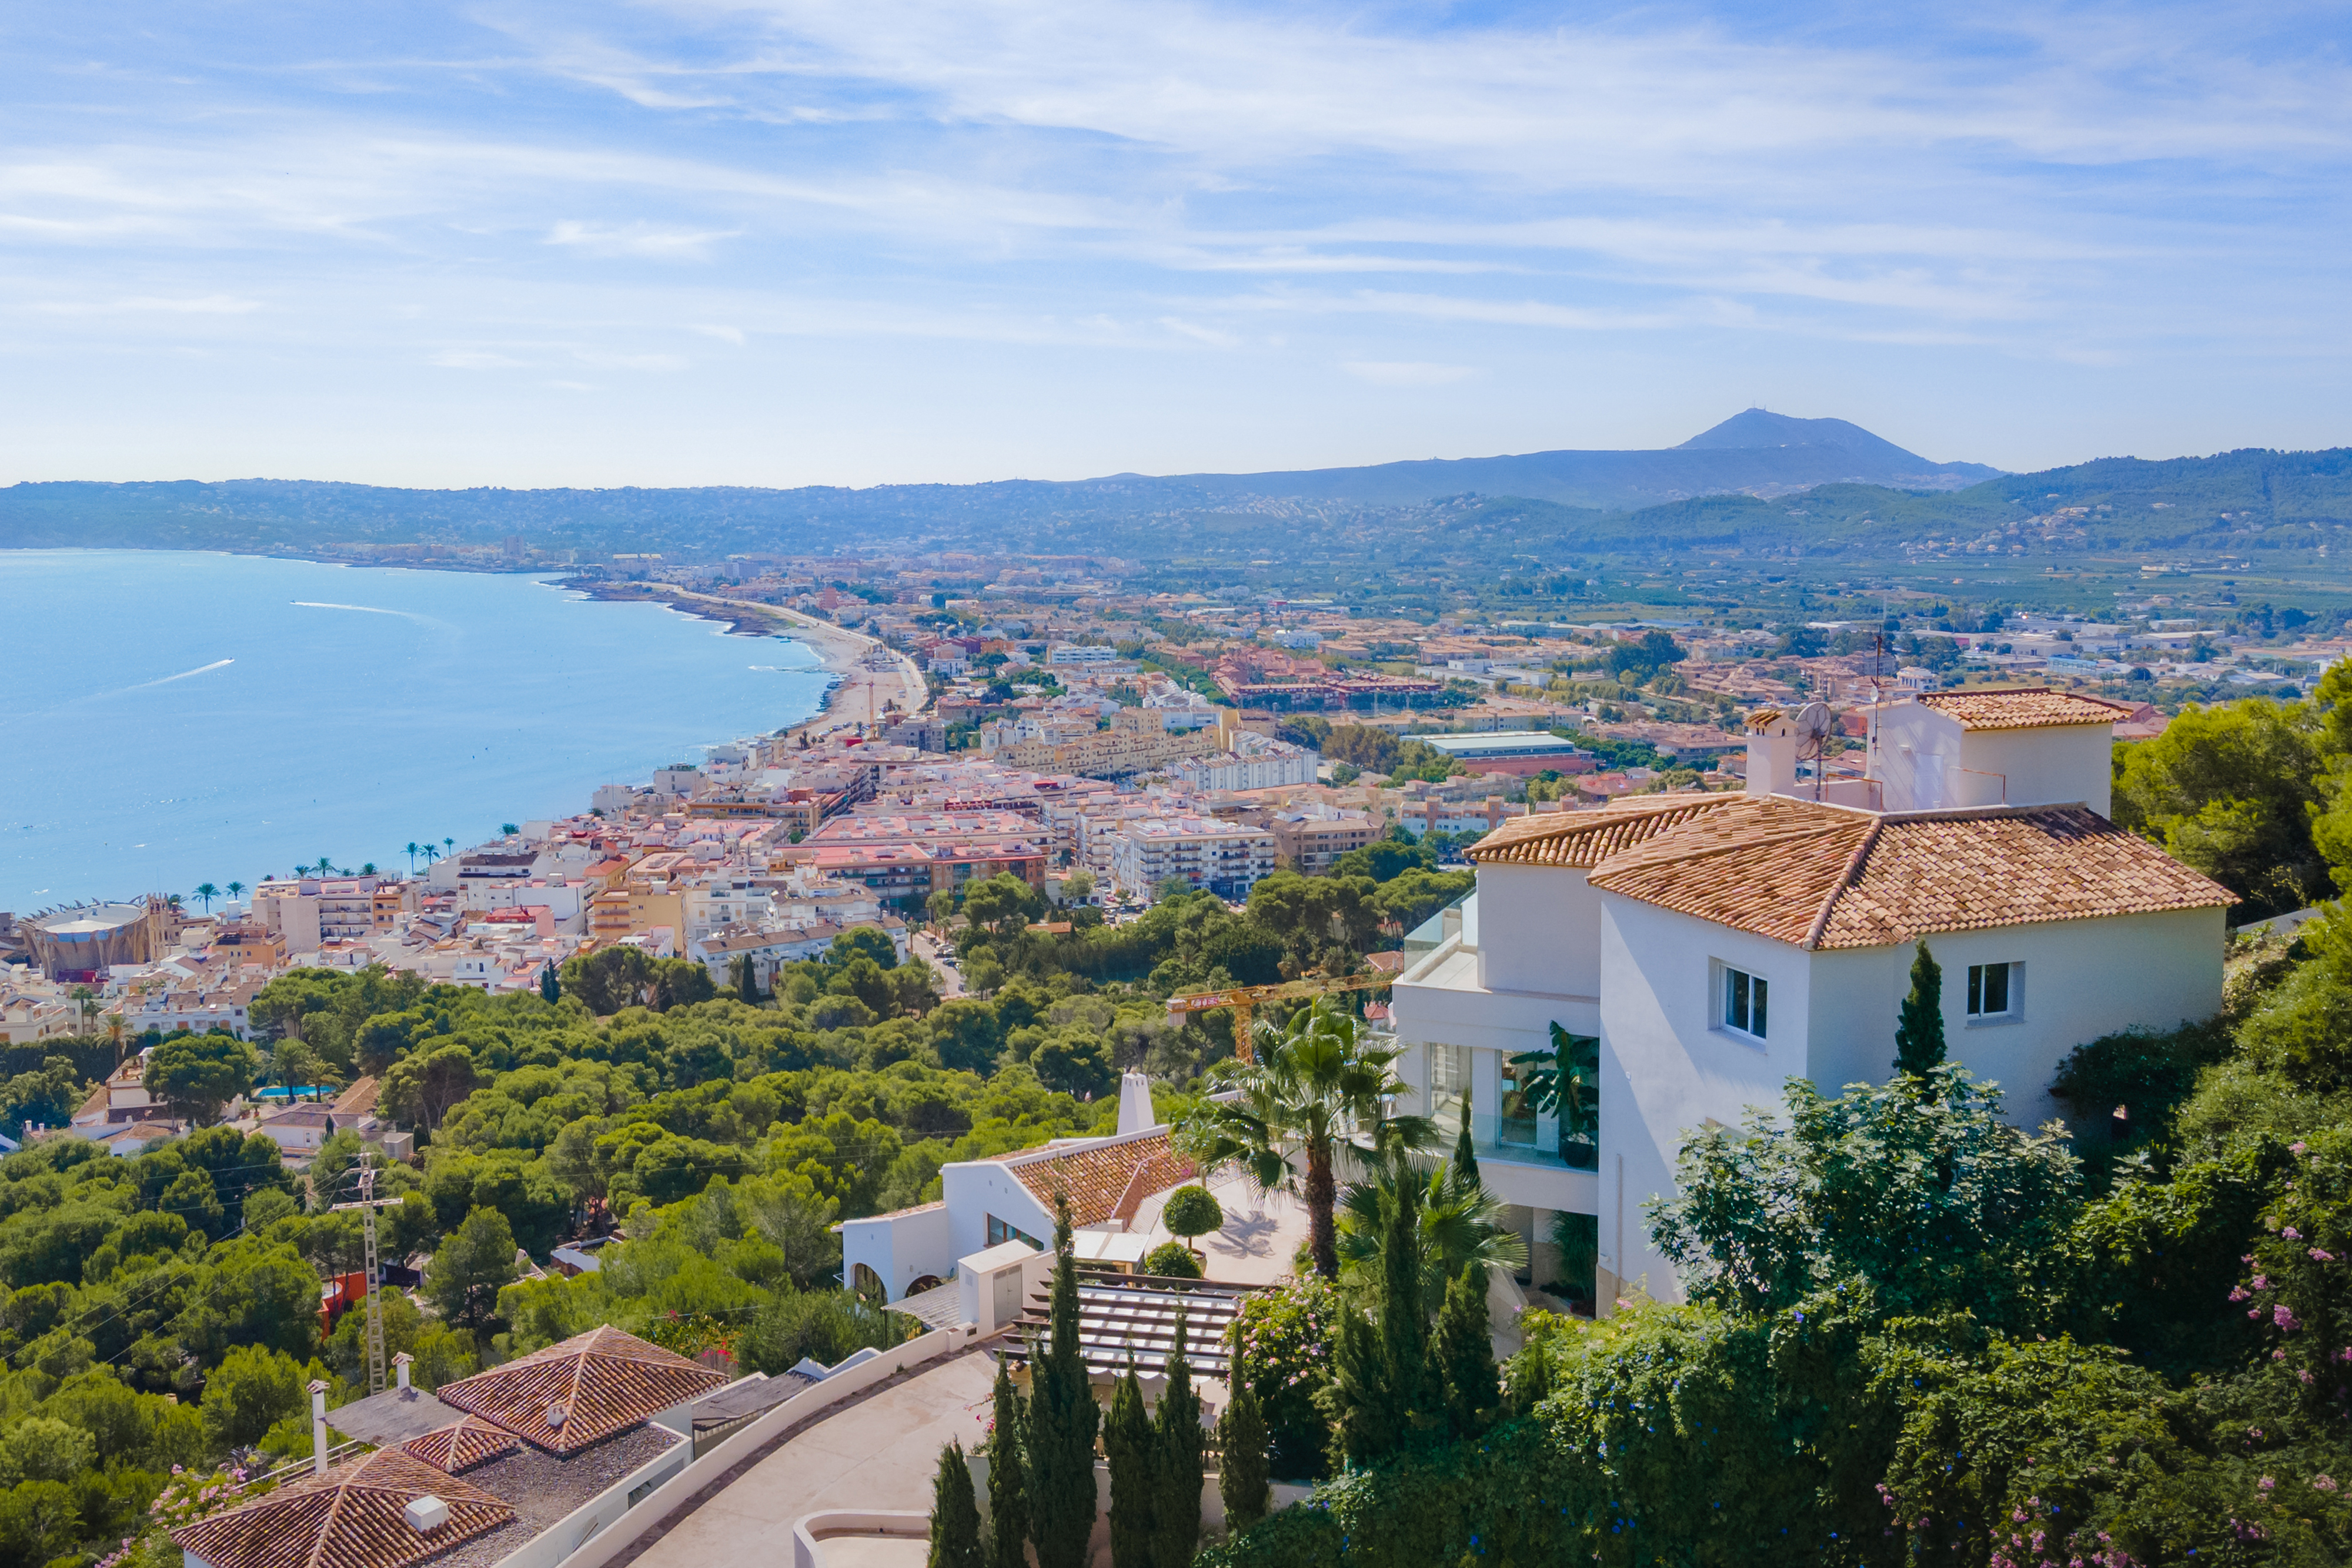 Foreign buyers are driving increased property sales in Spain, especially on the coast